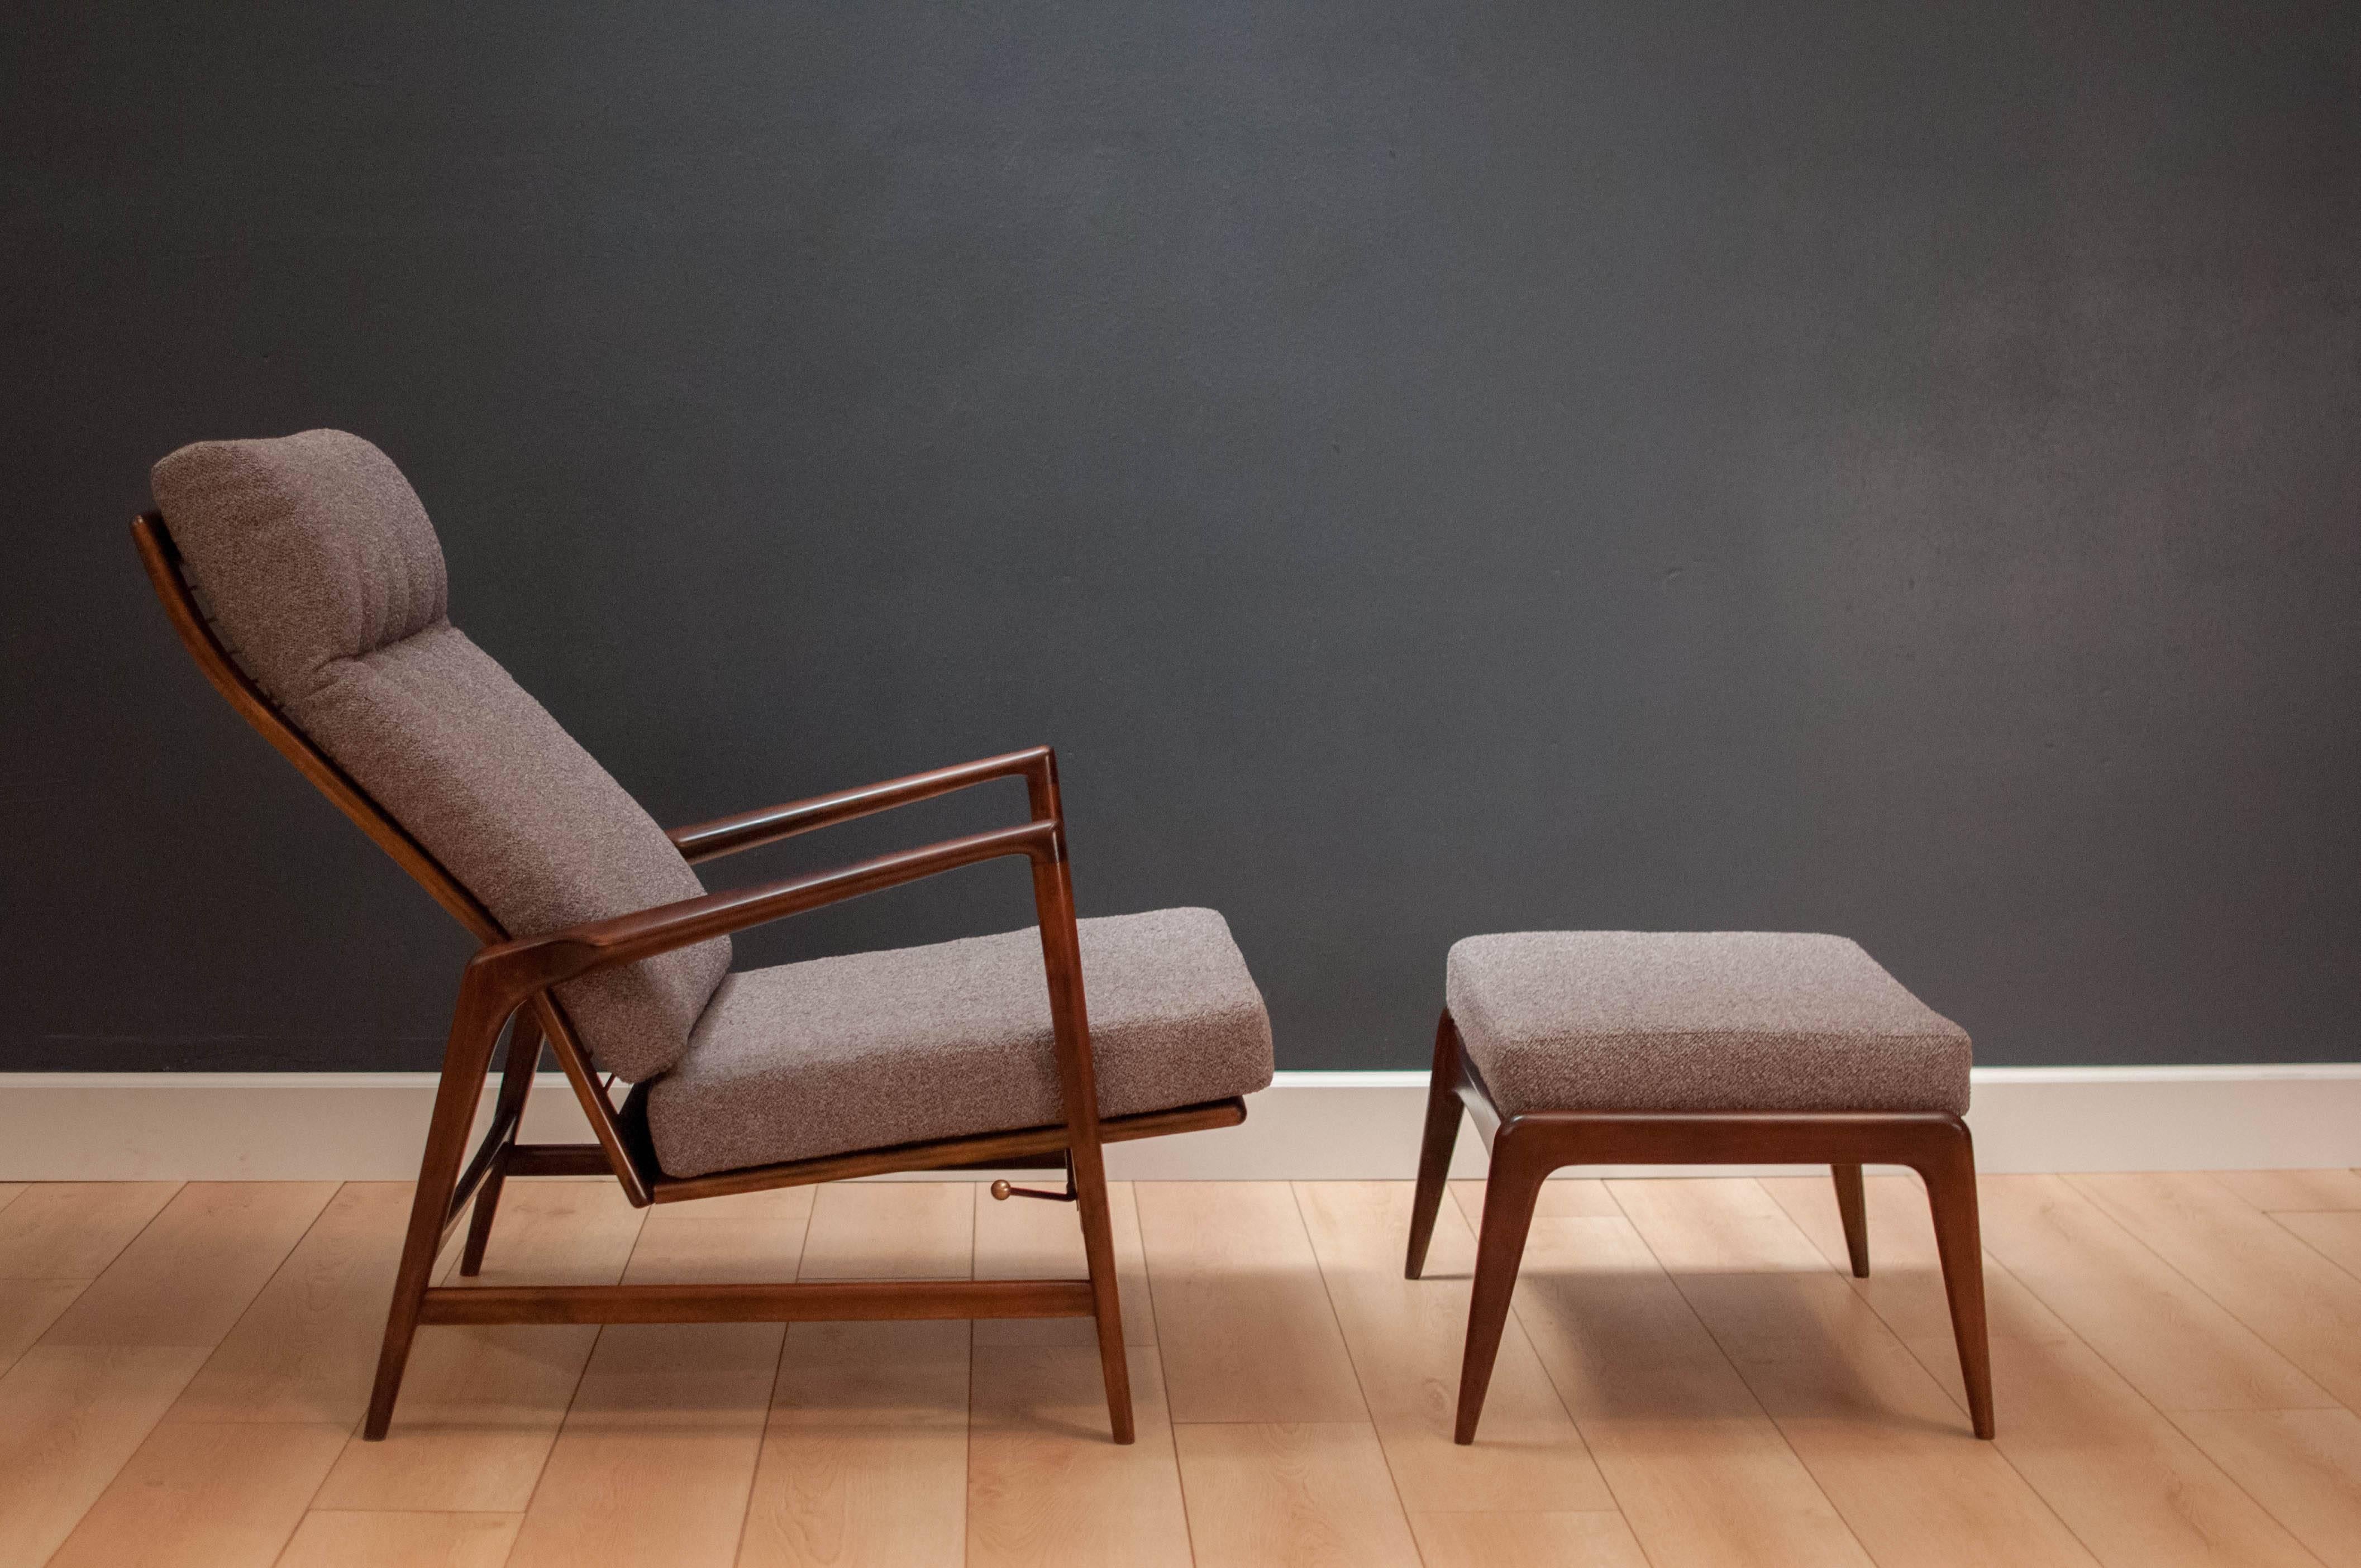 Danish modern reclining lounge chair and ottoman designed by Ib Kofod-Larsen. This piece has been newly reupholstered in a soft grey Maharam fabric. Frame displays sleek minimal lines with sculpted arms. 
 
Measures: Recliner: 29